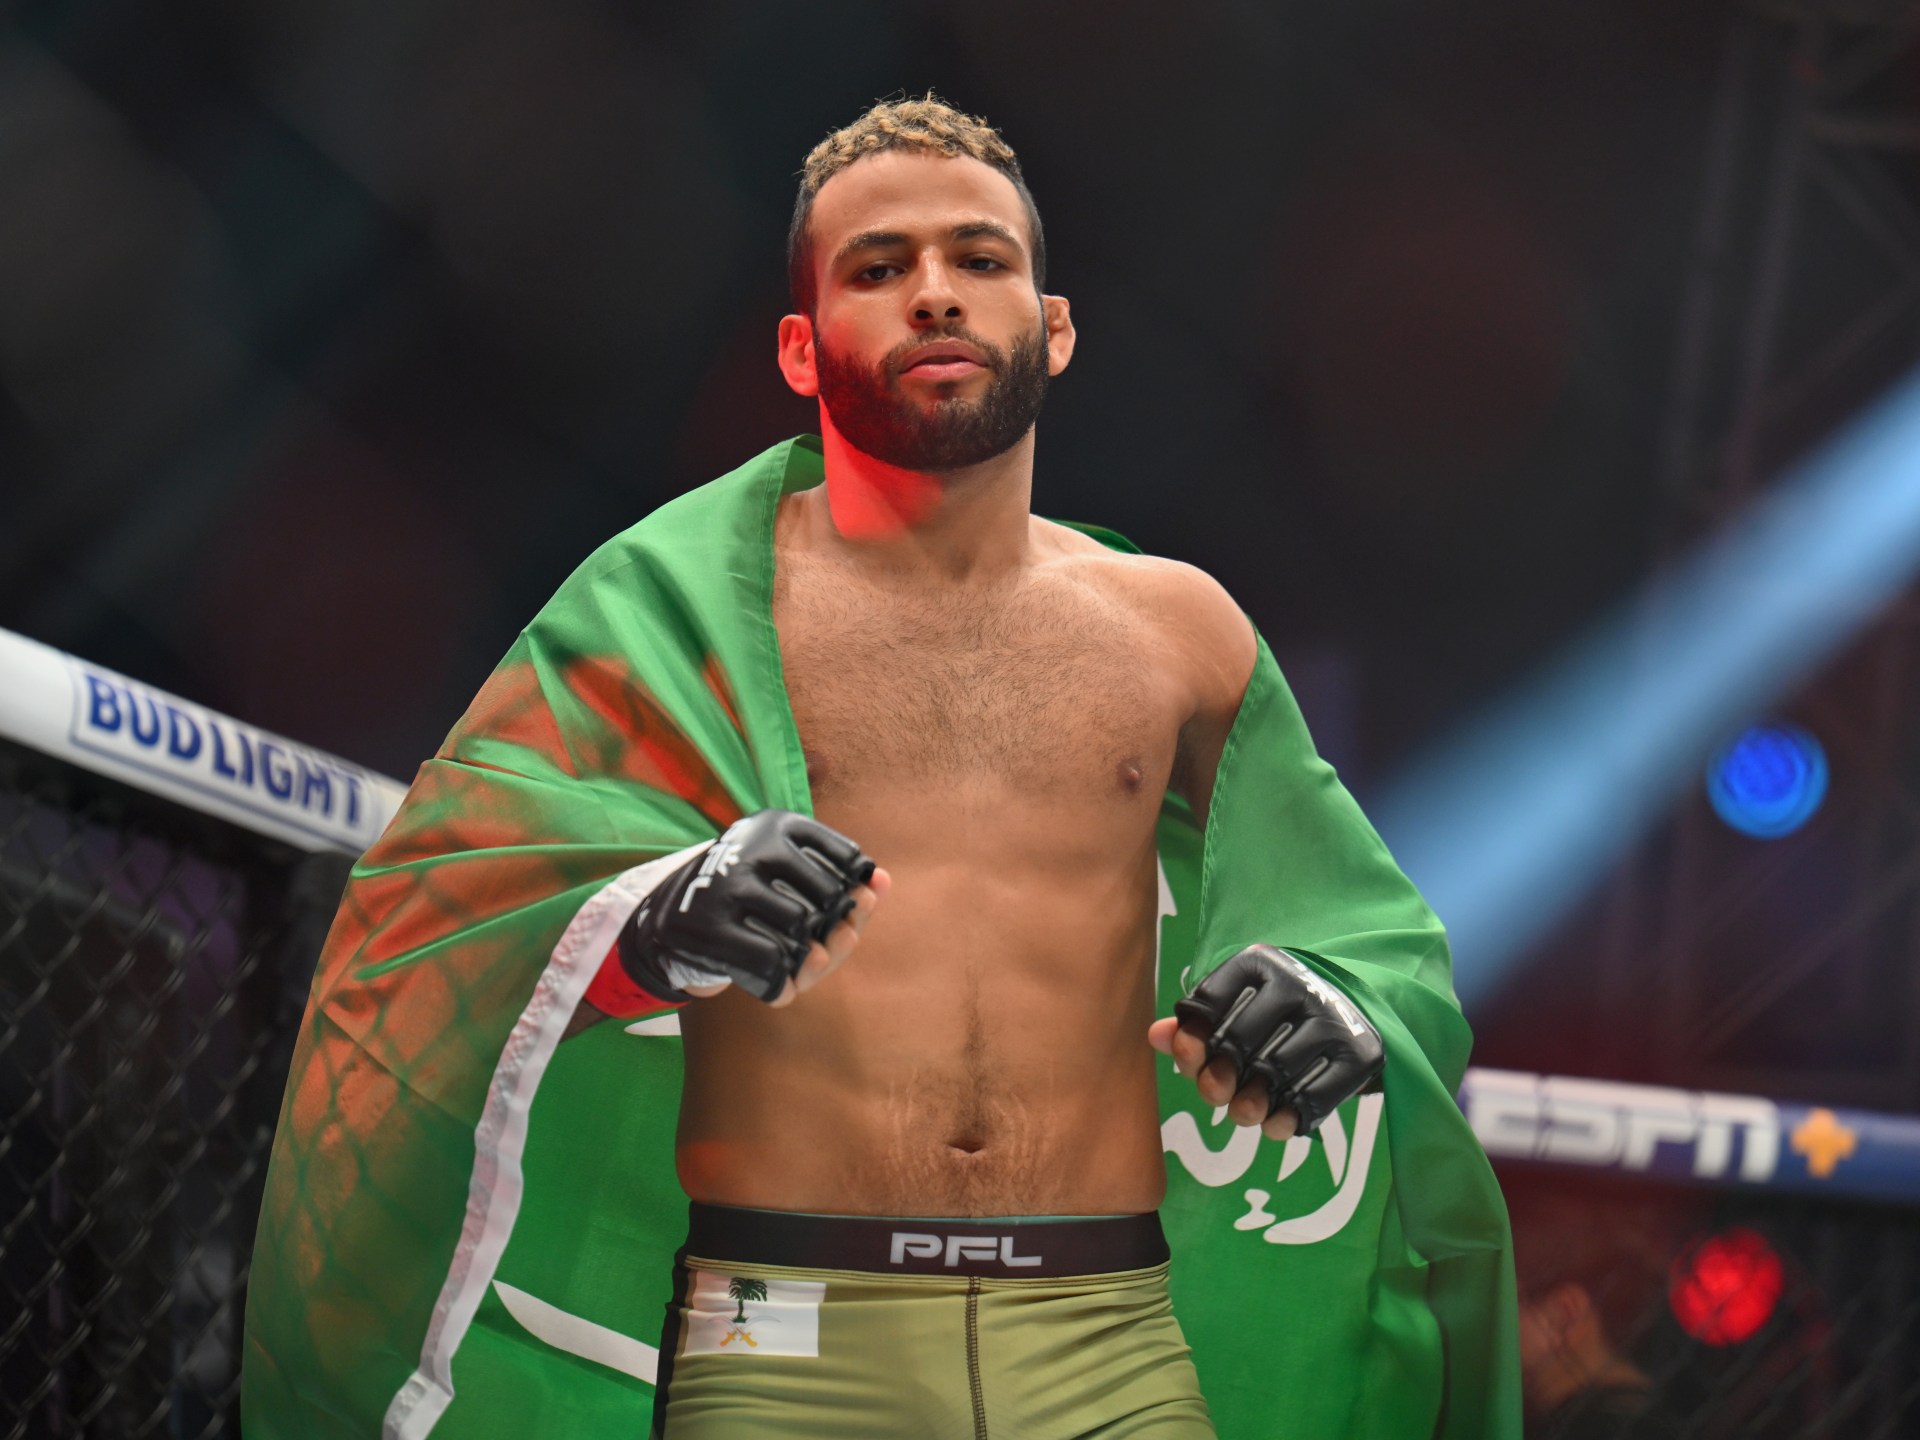 Saudi sports push expands into mixed martial arts with PFL investment ...